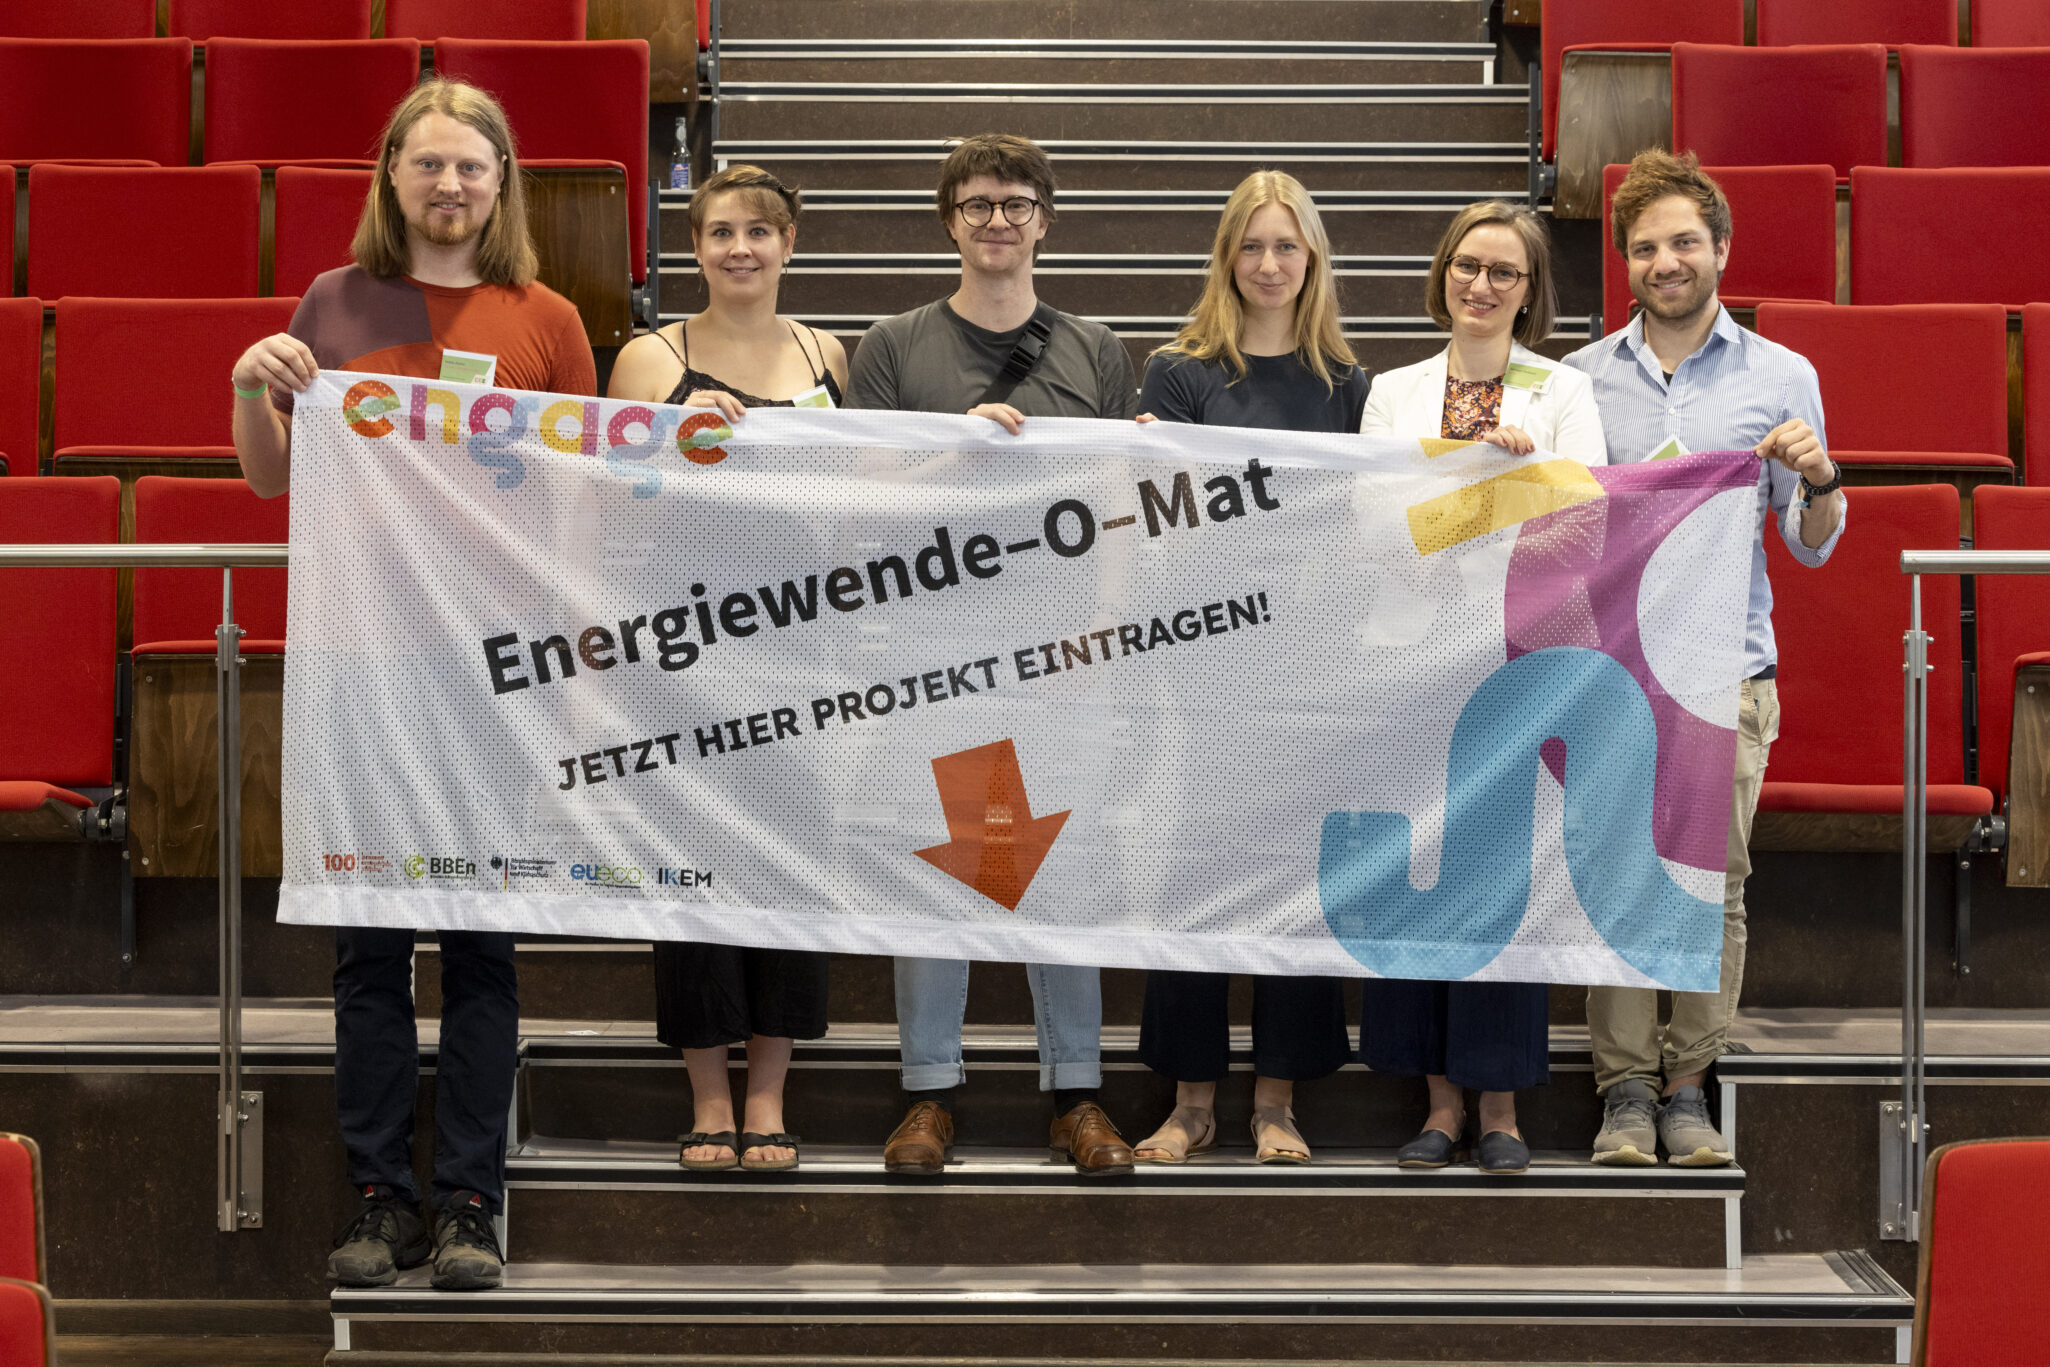 engage presents the Energiewende-O-Mat